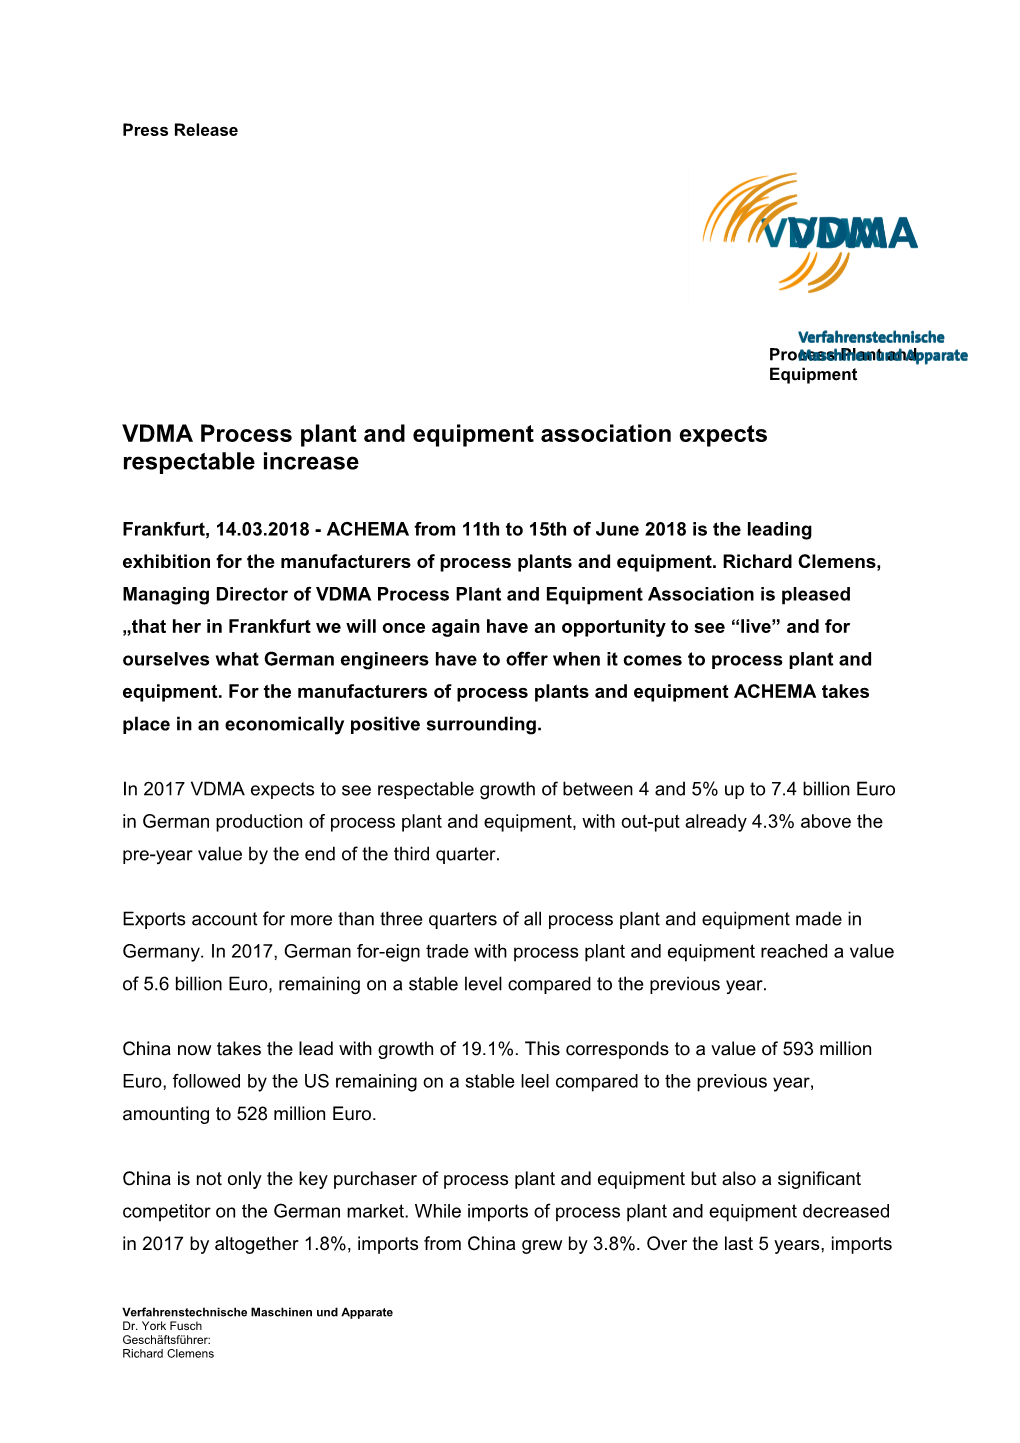 VDMA Process Plant and Equipment Association Expects Respectable Increase